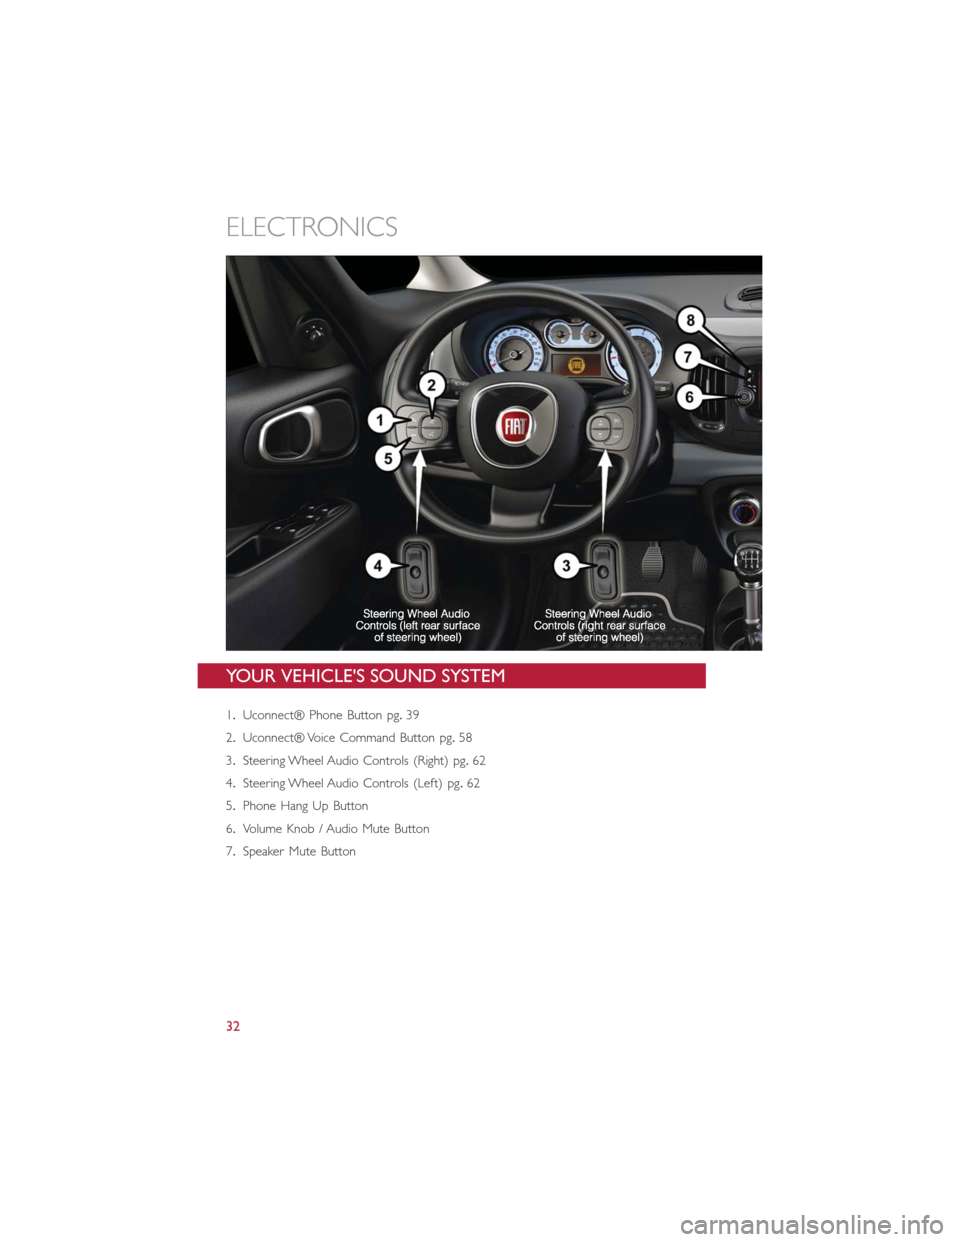 FIAT 500L 2014 2.G Owners Guide YOUR VEHICLES SOUND SYSTEM
1.Uconnect® Phone Button pg.39
2.Uconnect® Voice Command Button pg.58
3.Steering Wheel Audio Controls (Right) pg.62
4.Steering Wheel Audio Controls (Left) pg.62
5.Phone H